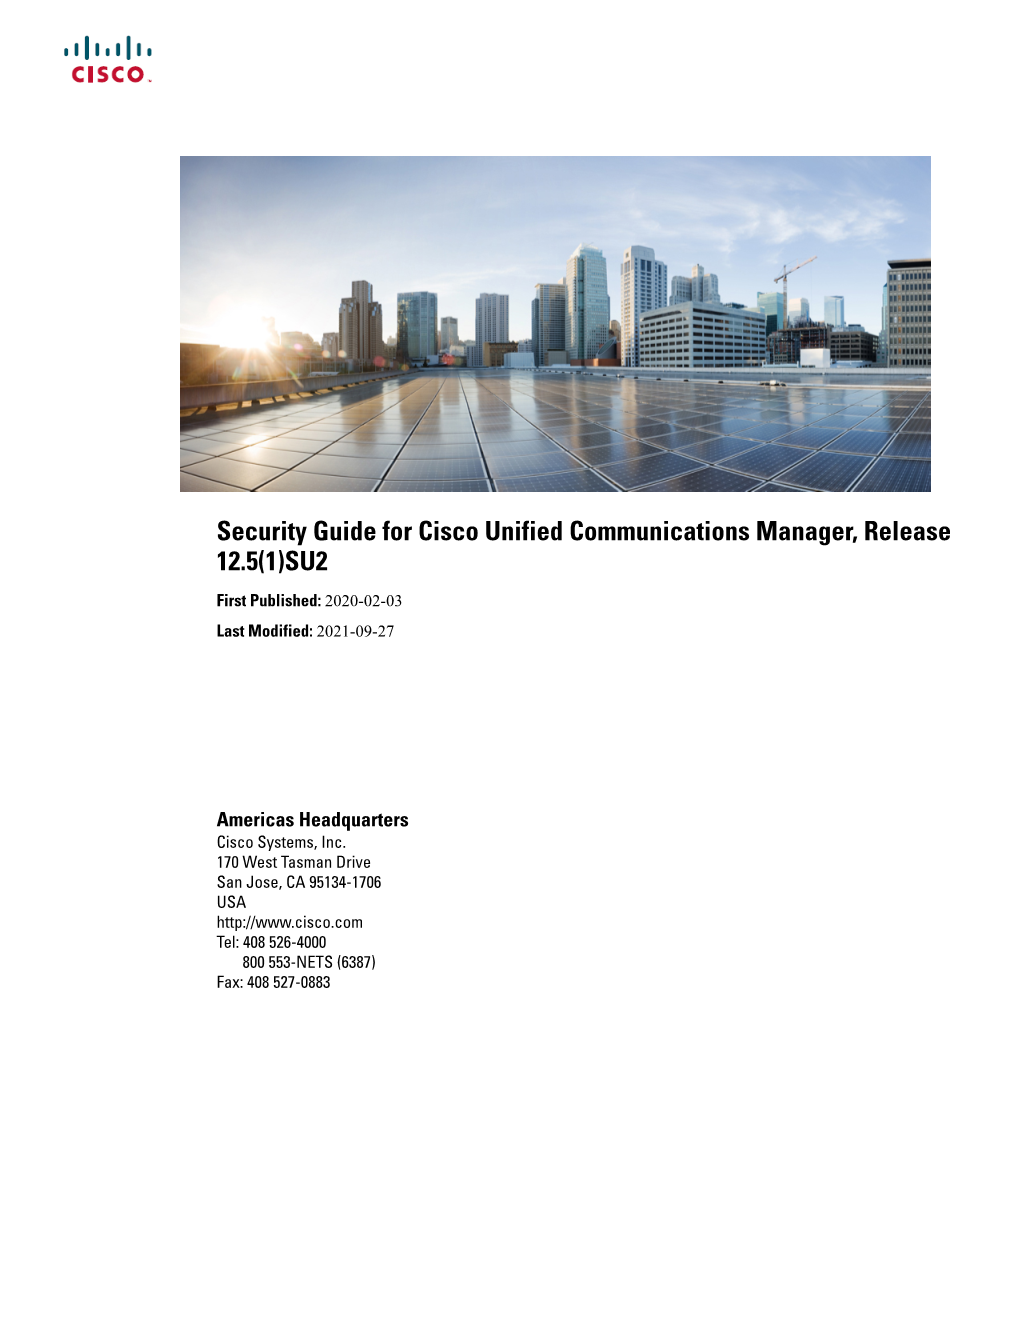 Security Guide for Cisco Unified Communications Manager, Release 12.5(1)SU2